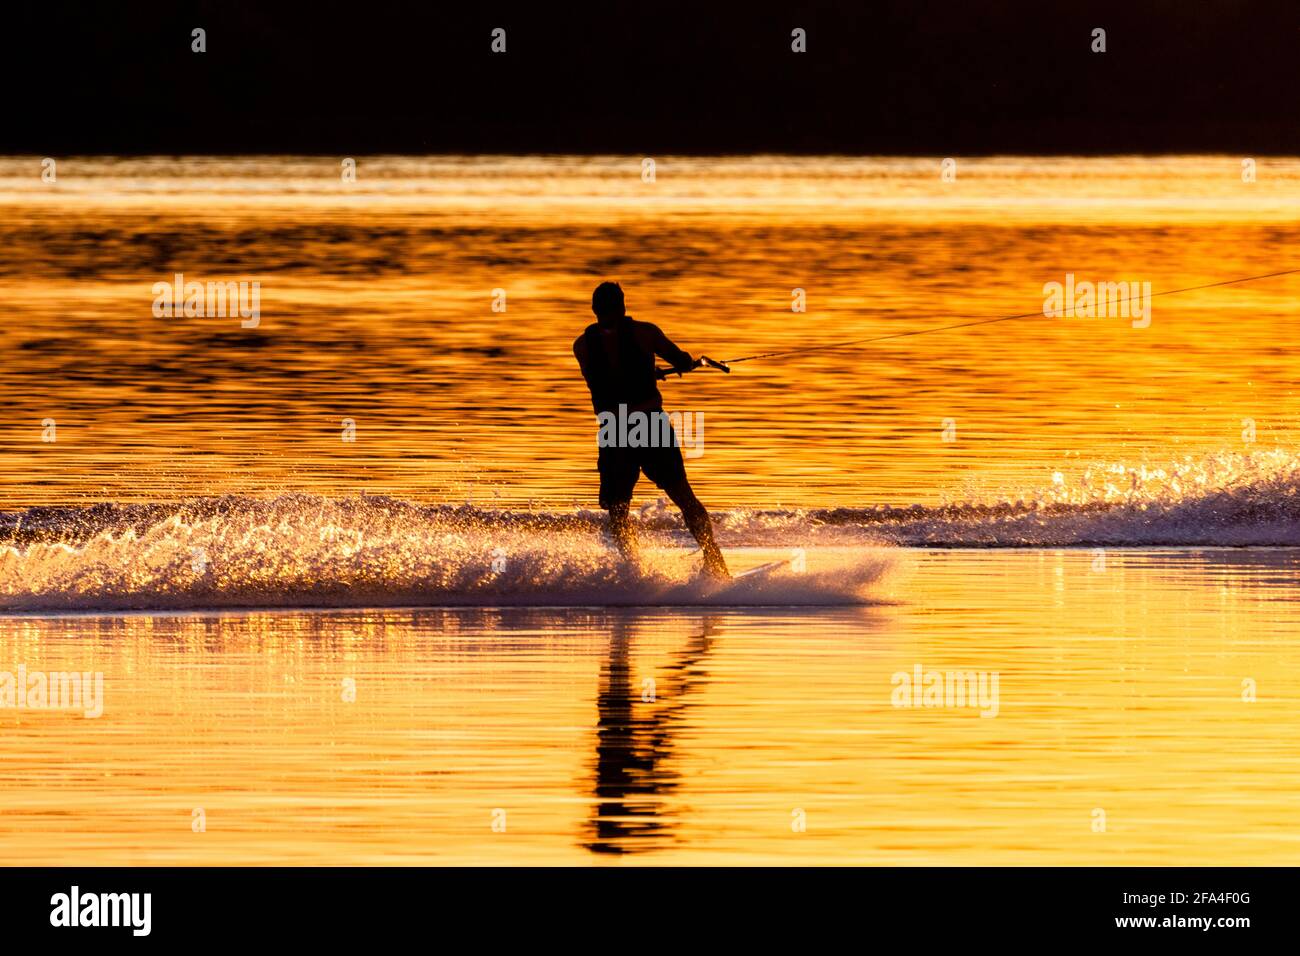 Silhouette of water skier at sunset on a Wisconsin Lake. Stock Photo